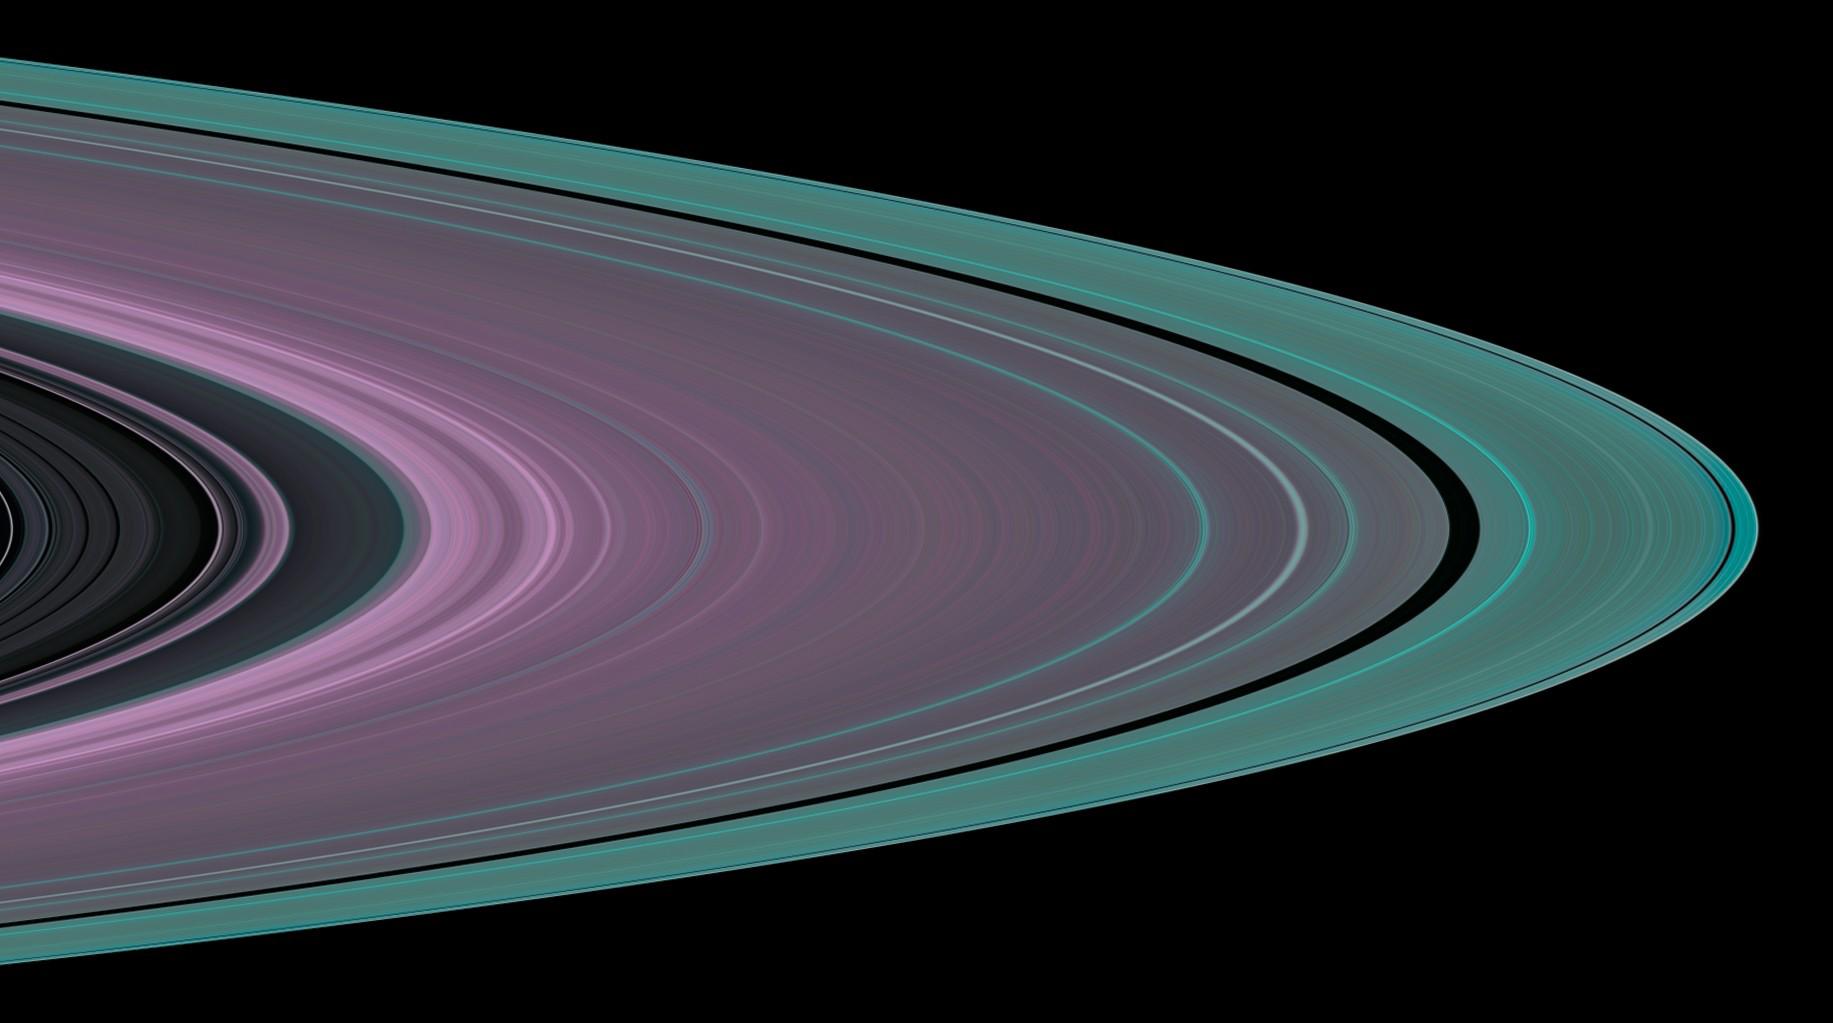 A simulated image of Saturn's rings